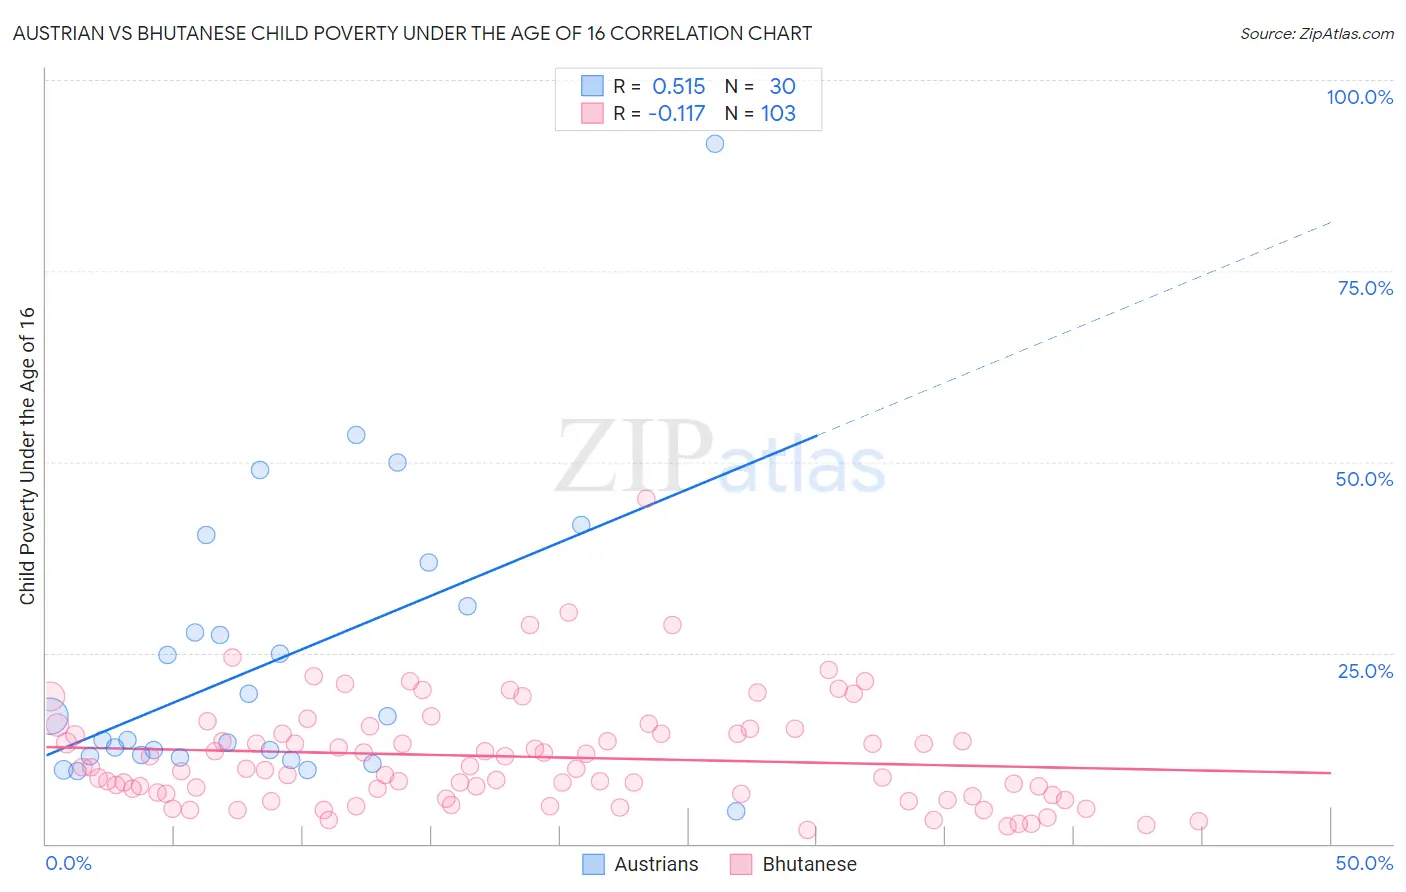 Austrian vs Bhutanese Child Poverty Under the Age of 16